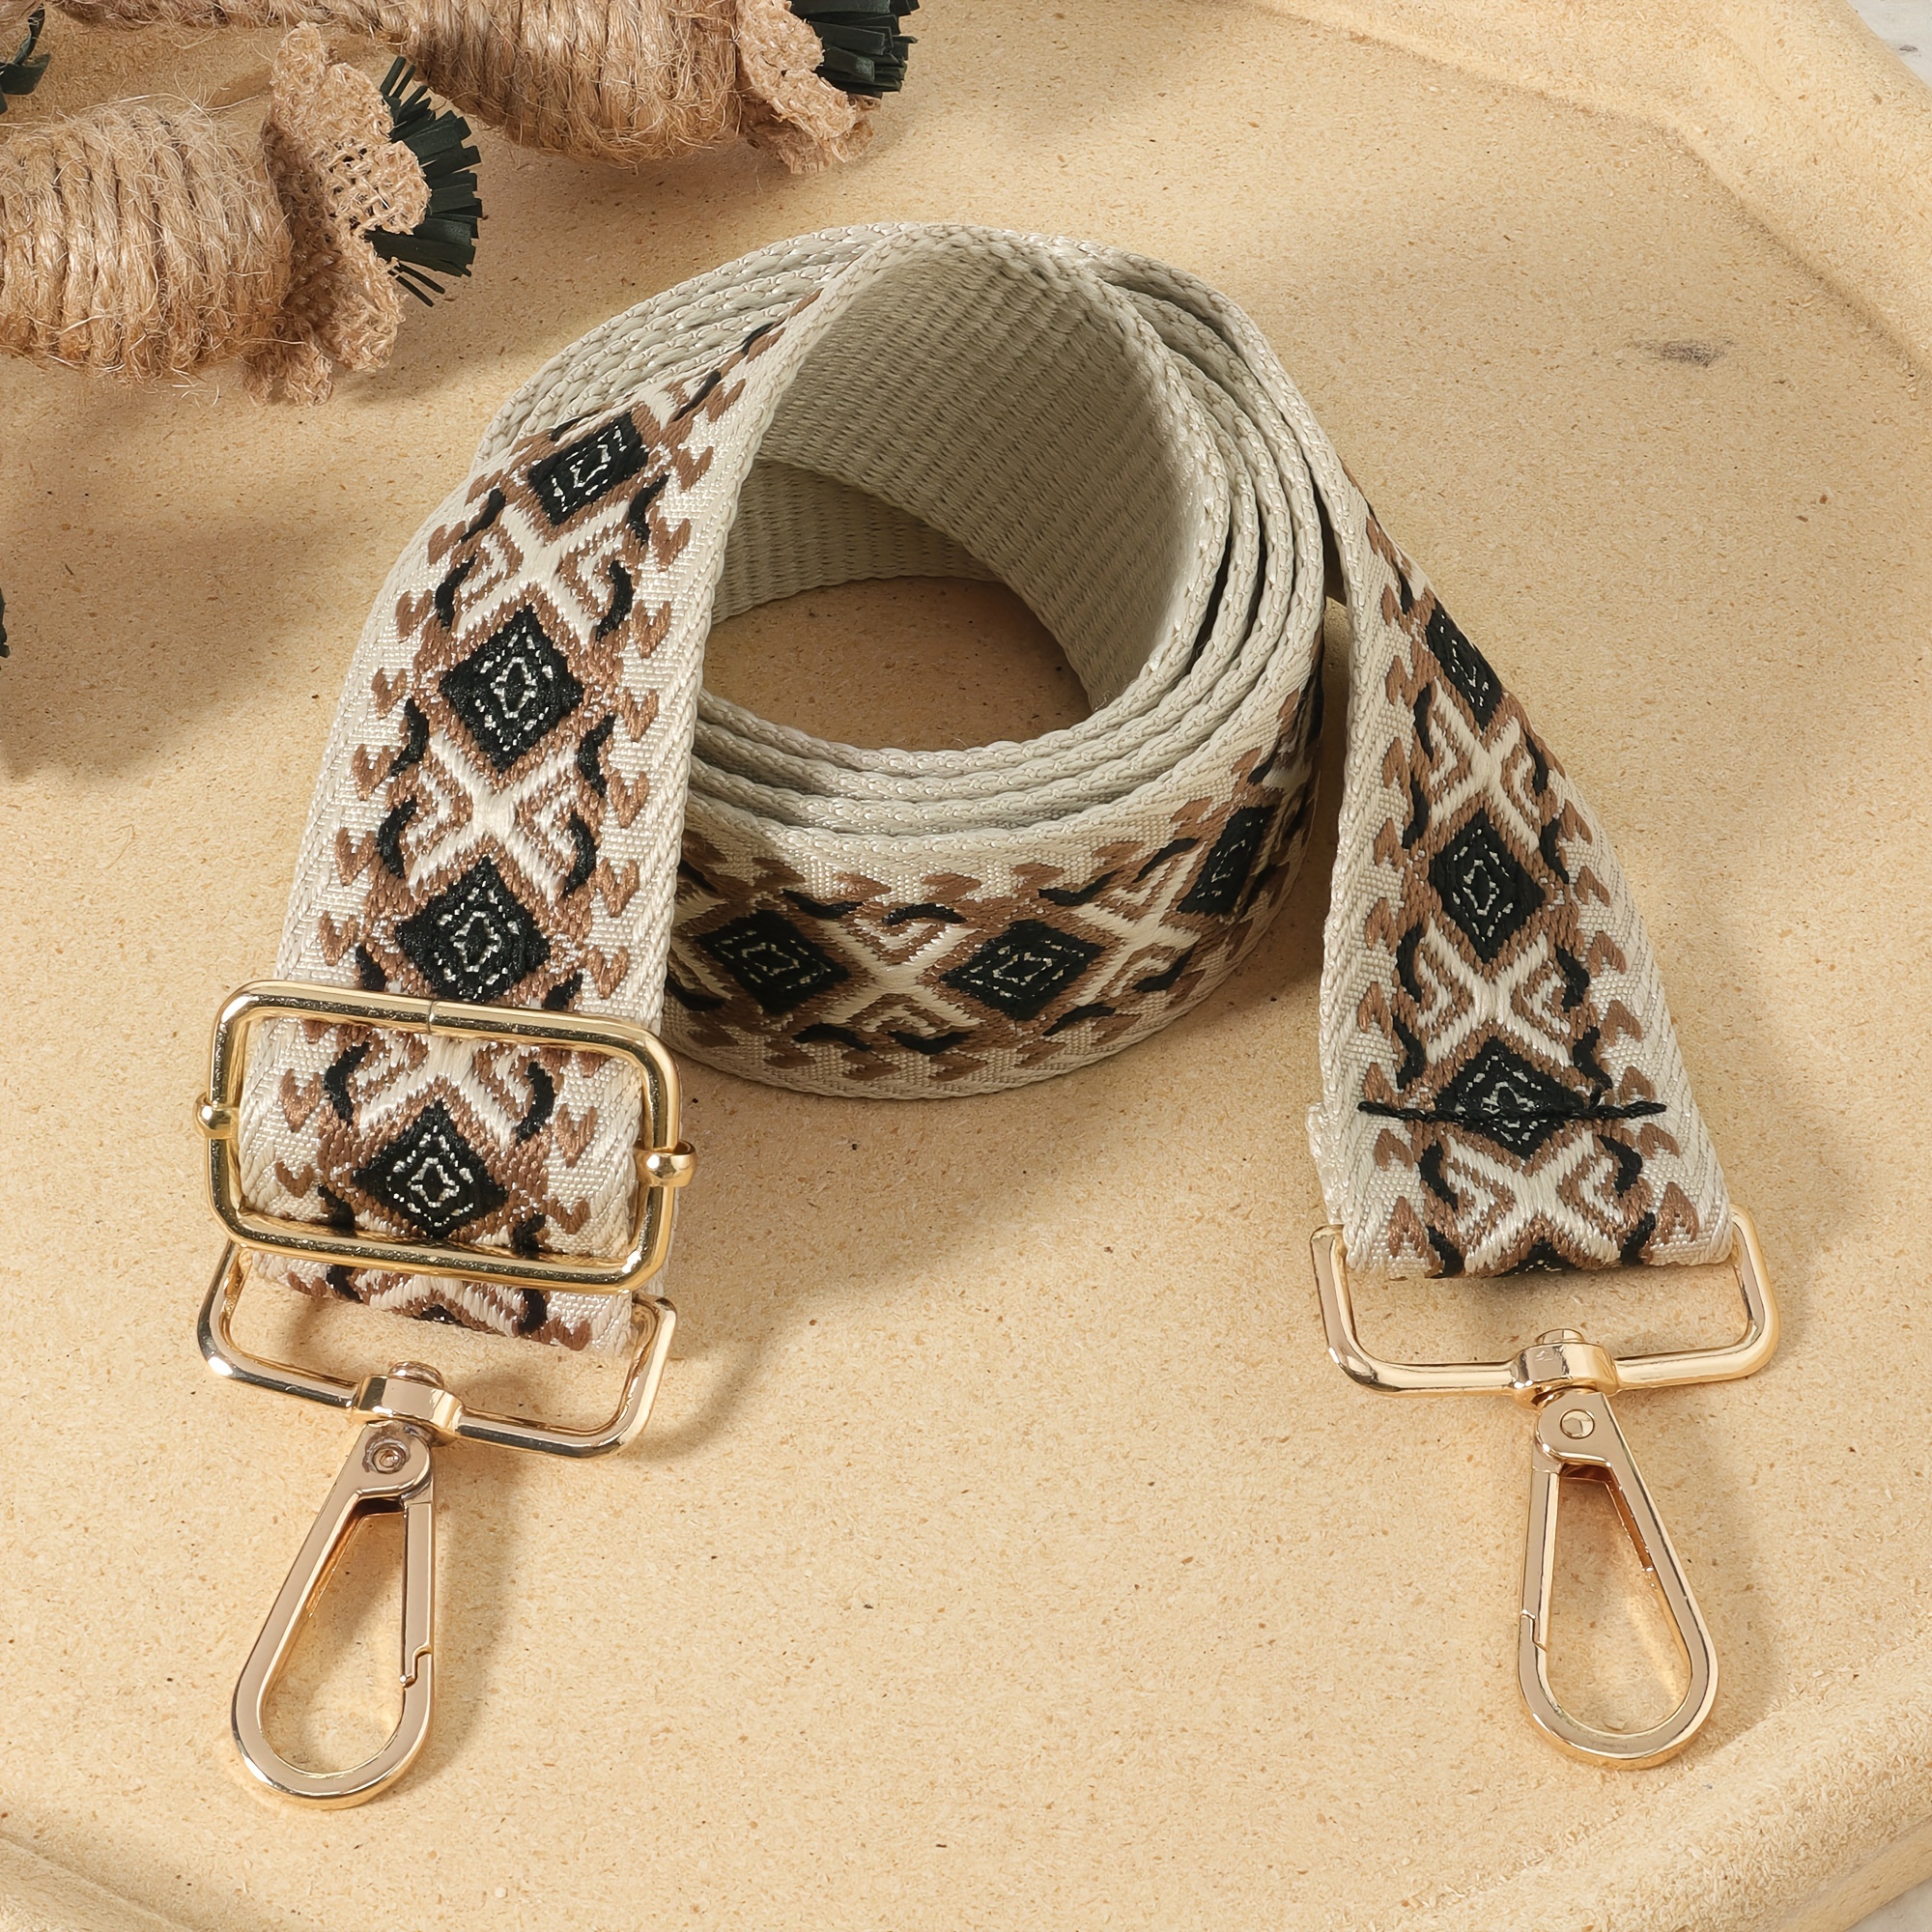 

Simple Pattern Strap, Replaceable Adjustable Bag Strap, Multi Functional Travel Accessory